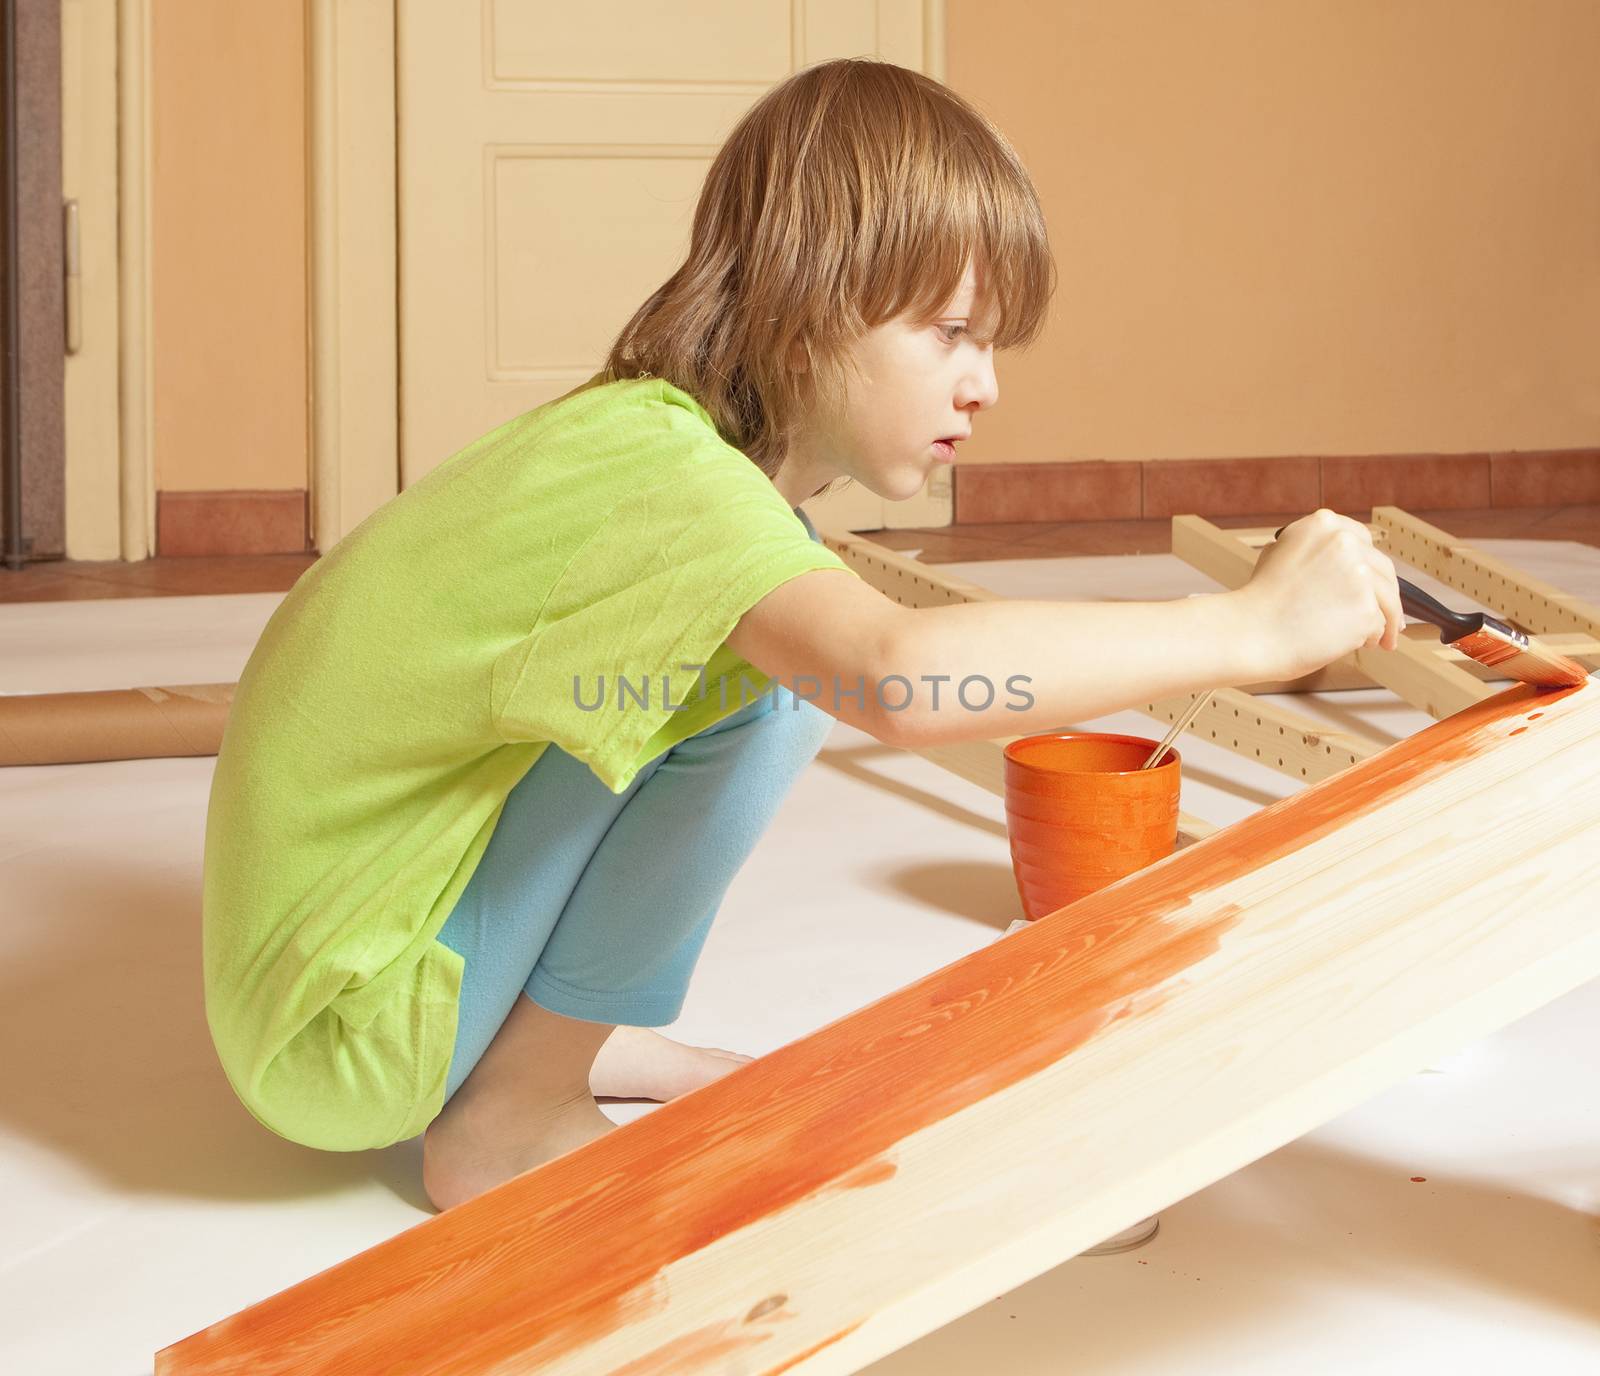 Boy with Blond Hair Painting a Board with Red Color